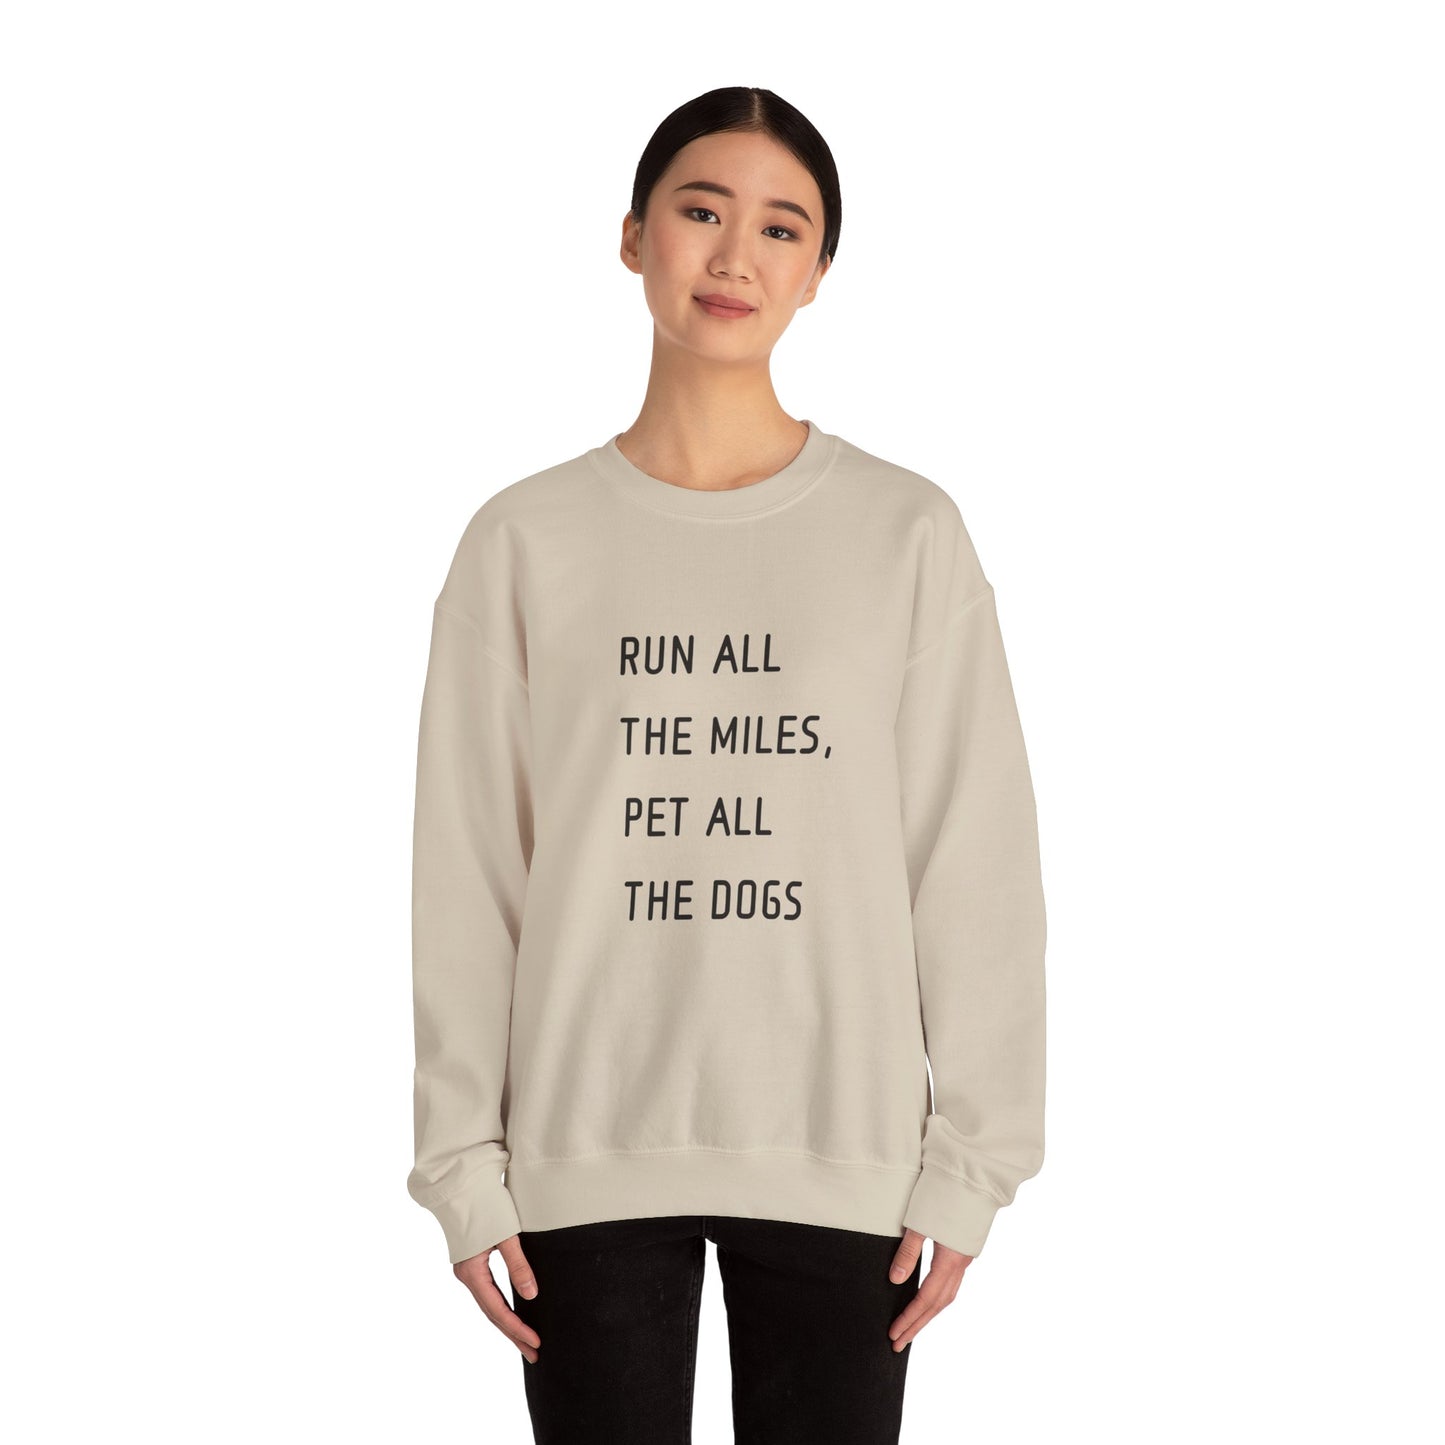 Pet All the Dogs Crewneck